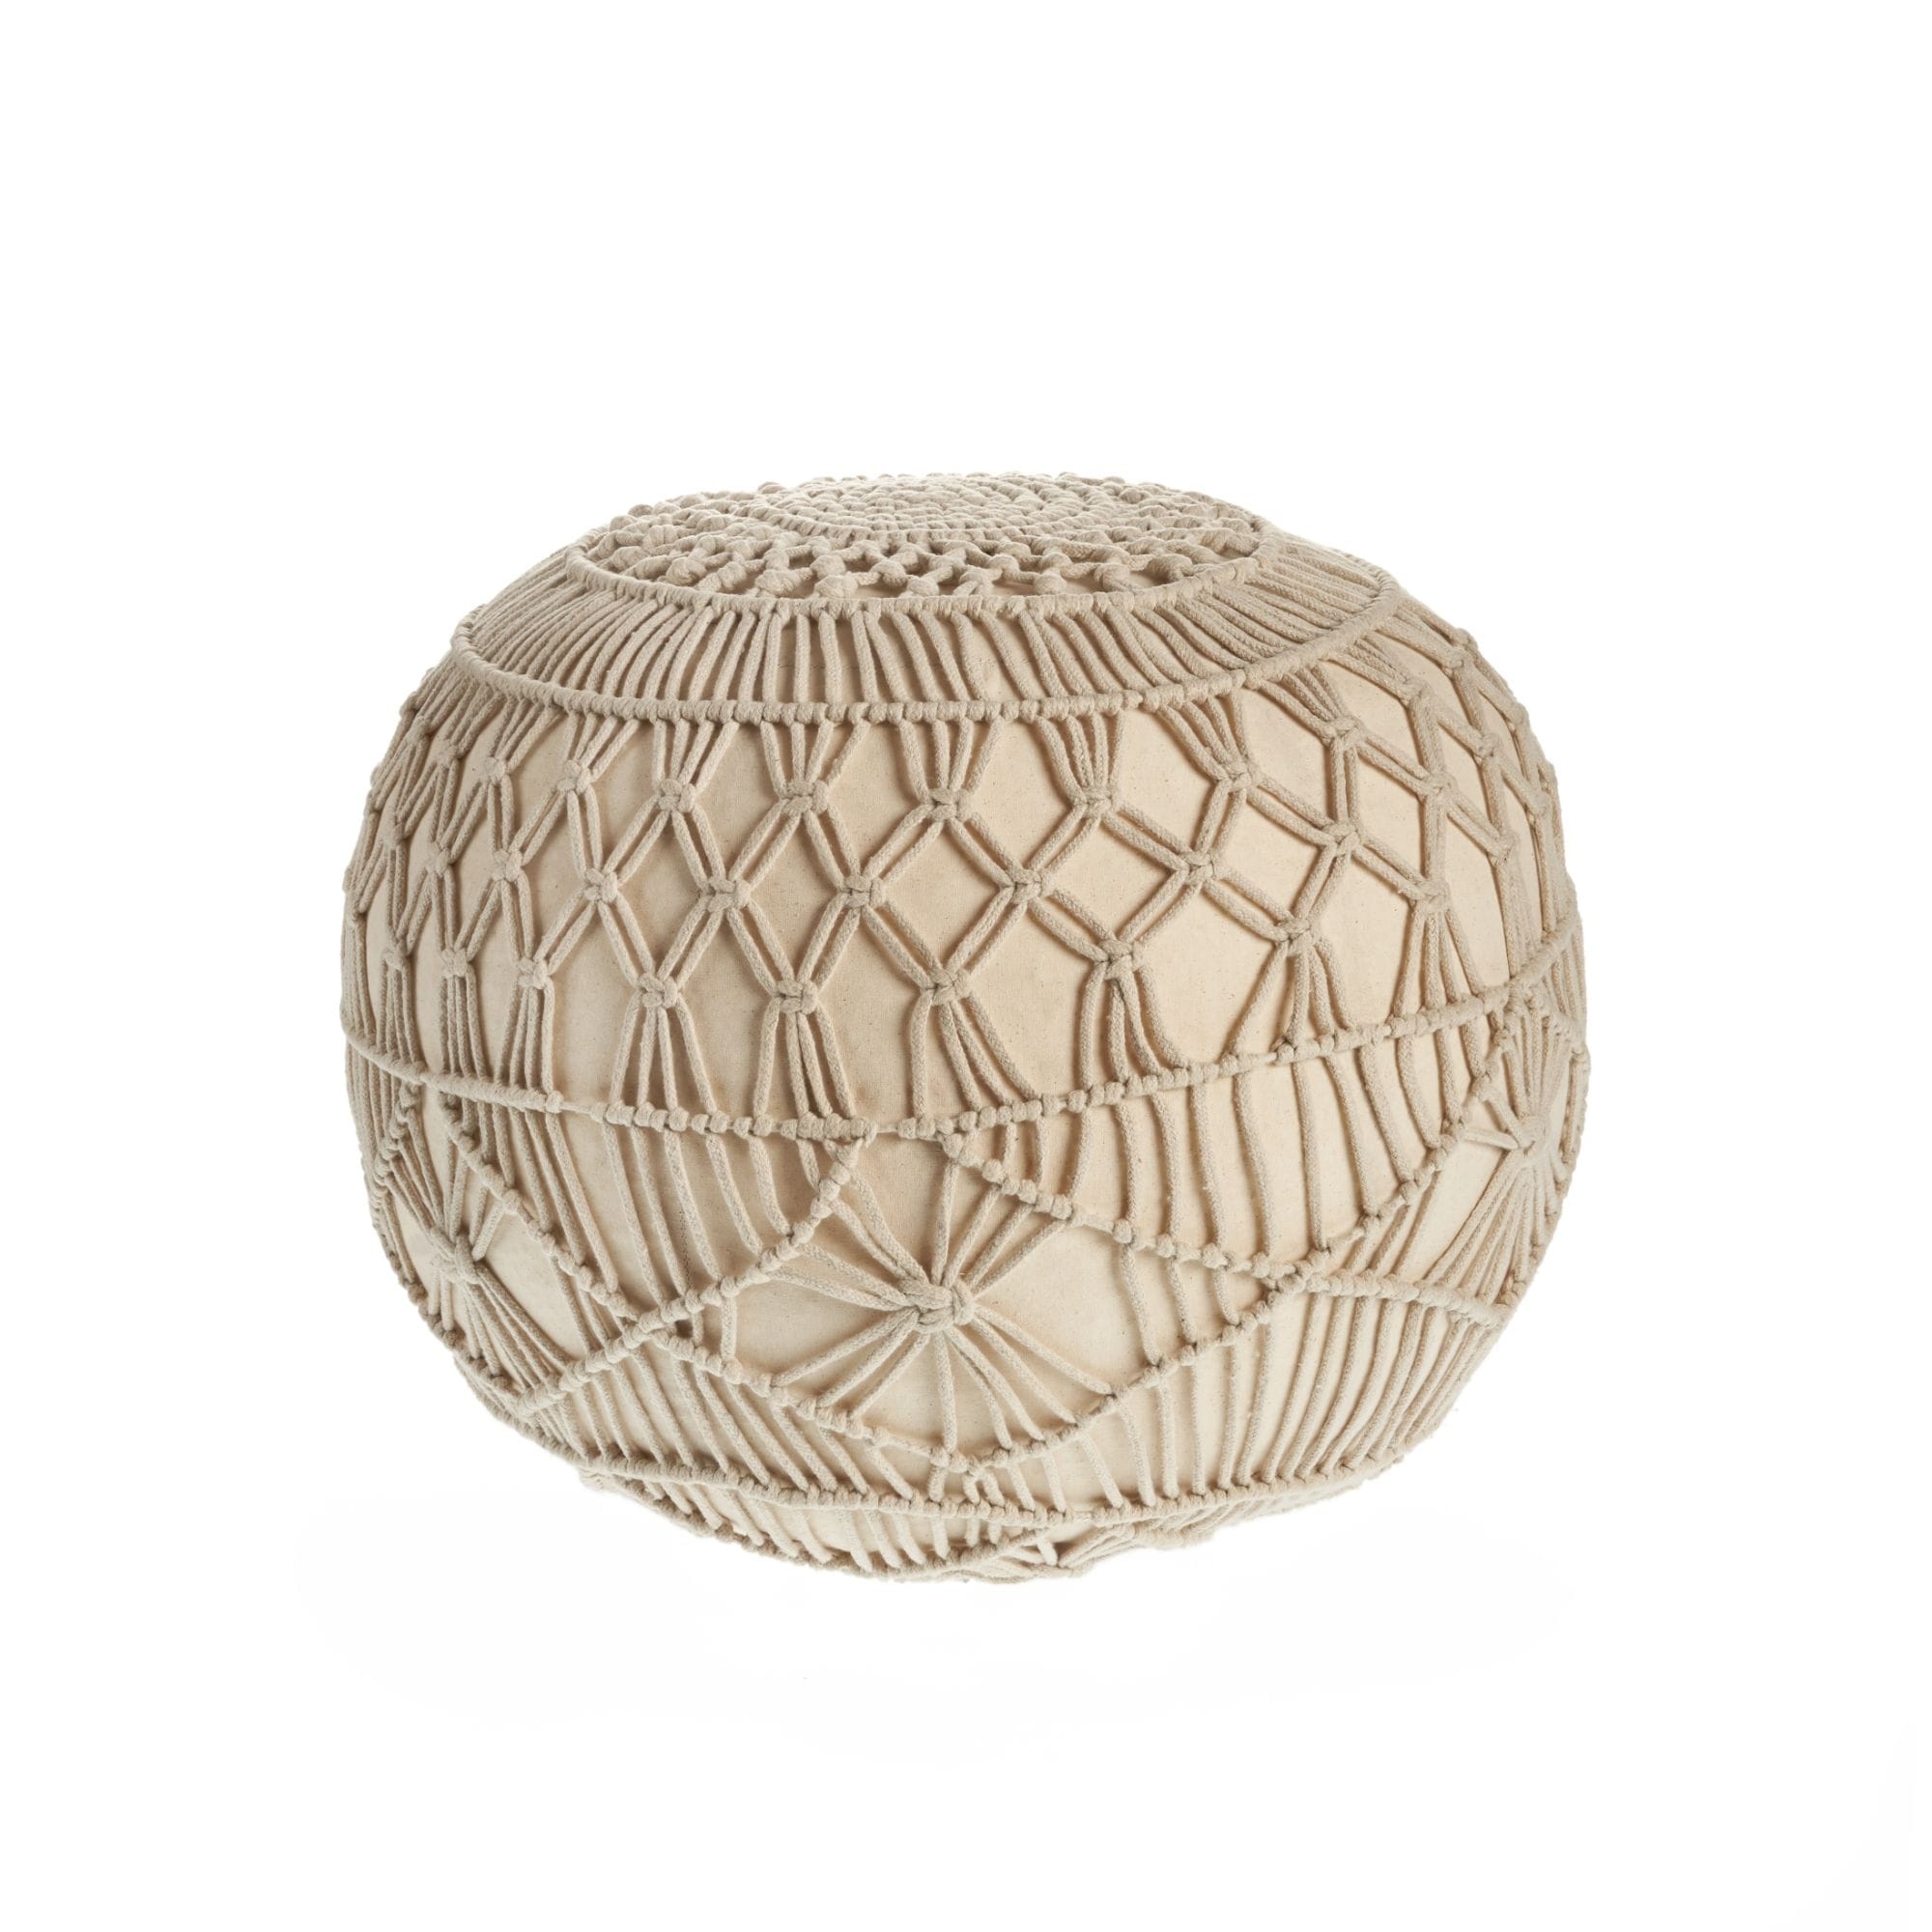 Laddha Home Designs 20 inch Beige Macrame Hand Knotted Round Pouf Ottoman